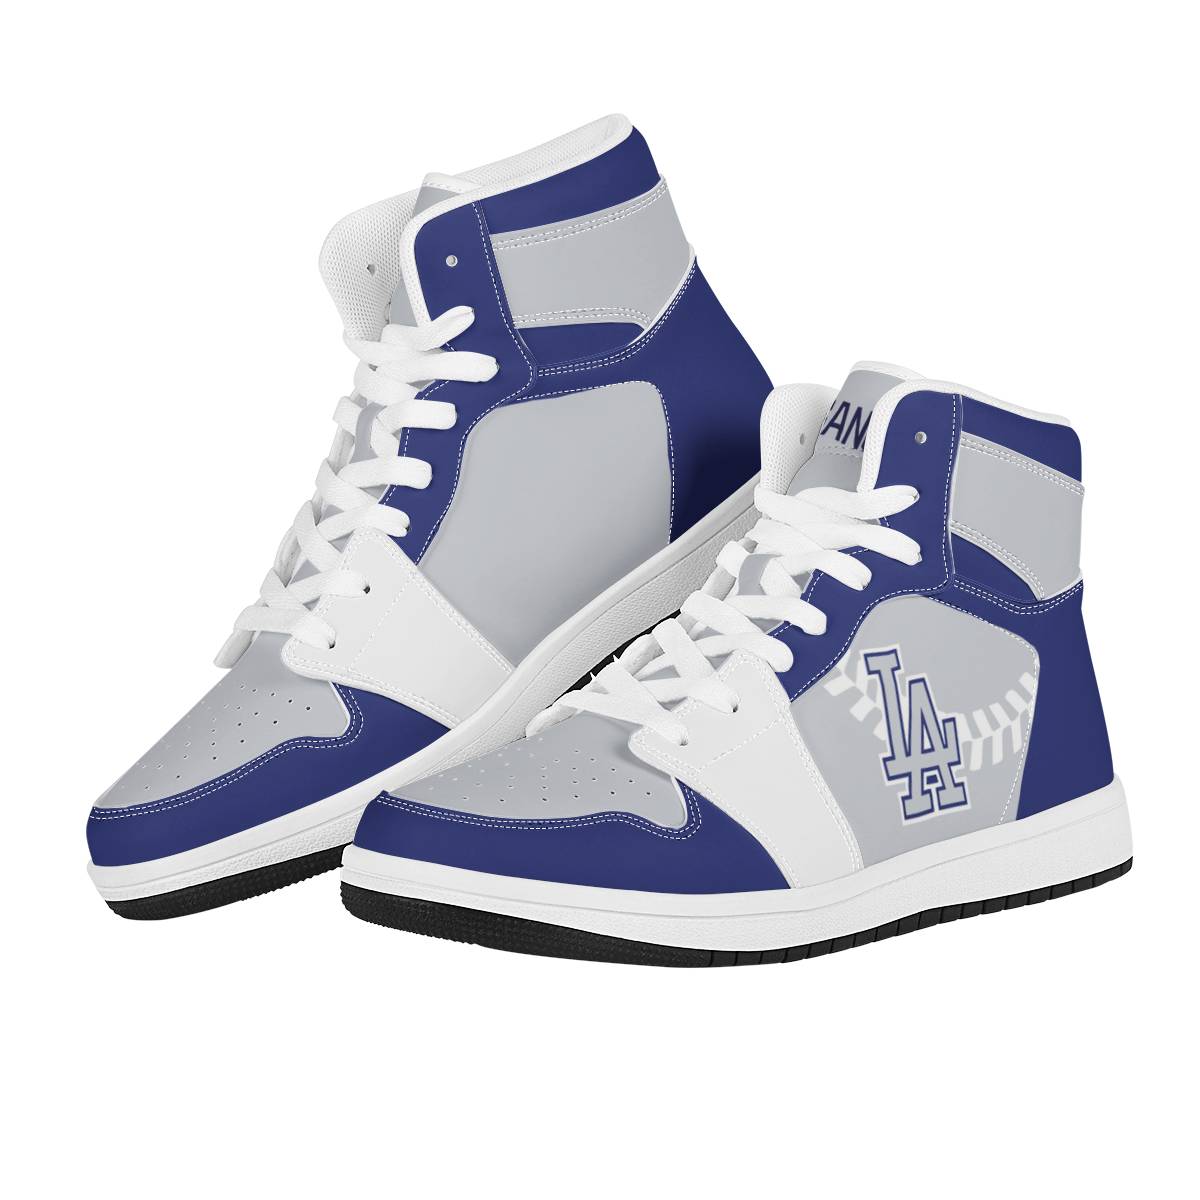 Women's Los Angeles Dodgers High Top Leather AJ1 Sneakers 001